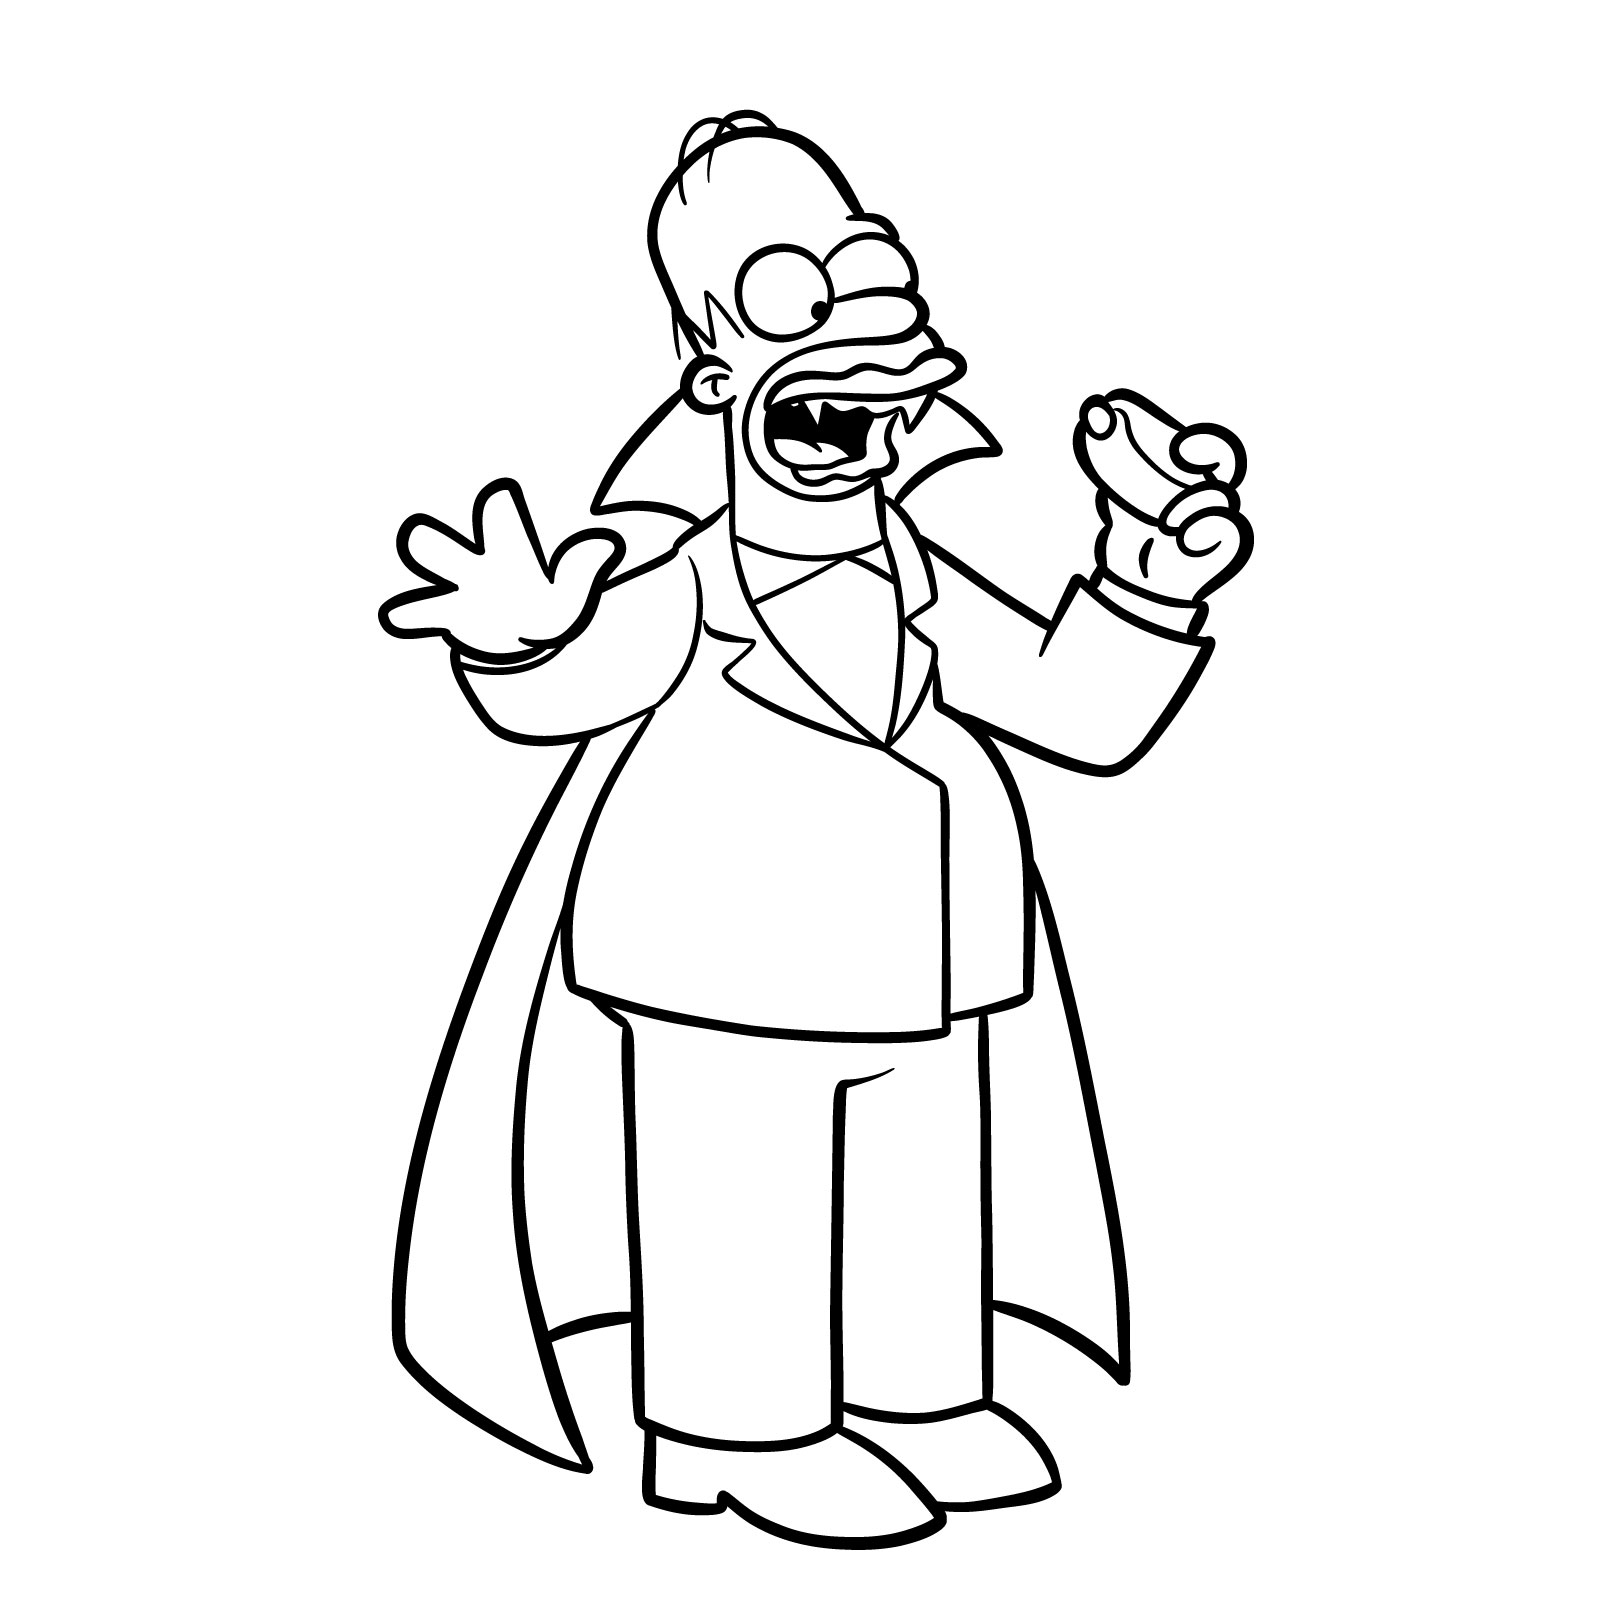 How to draw Vampire Homer - final step